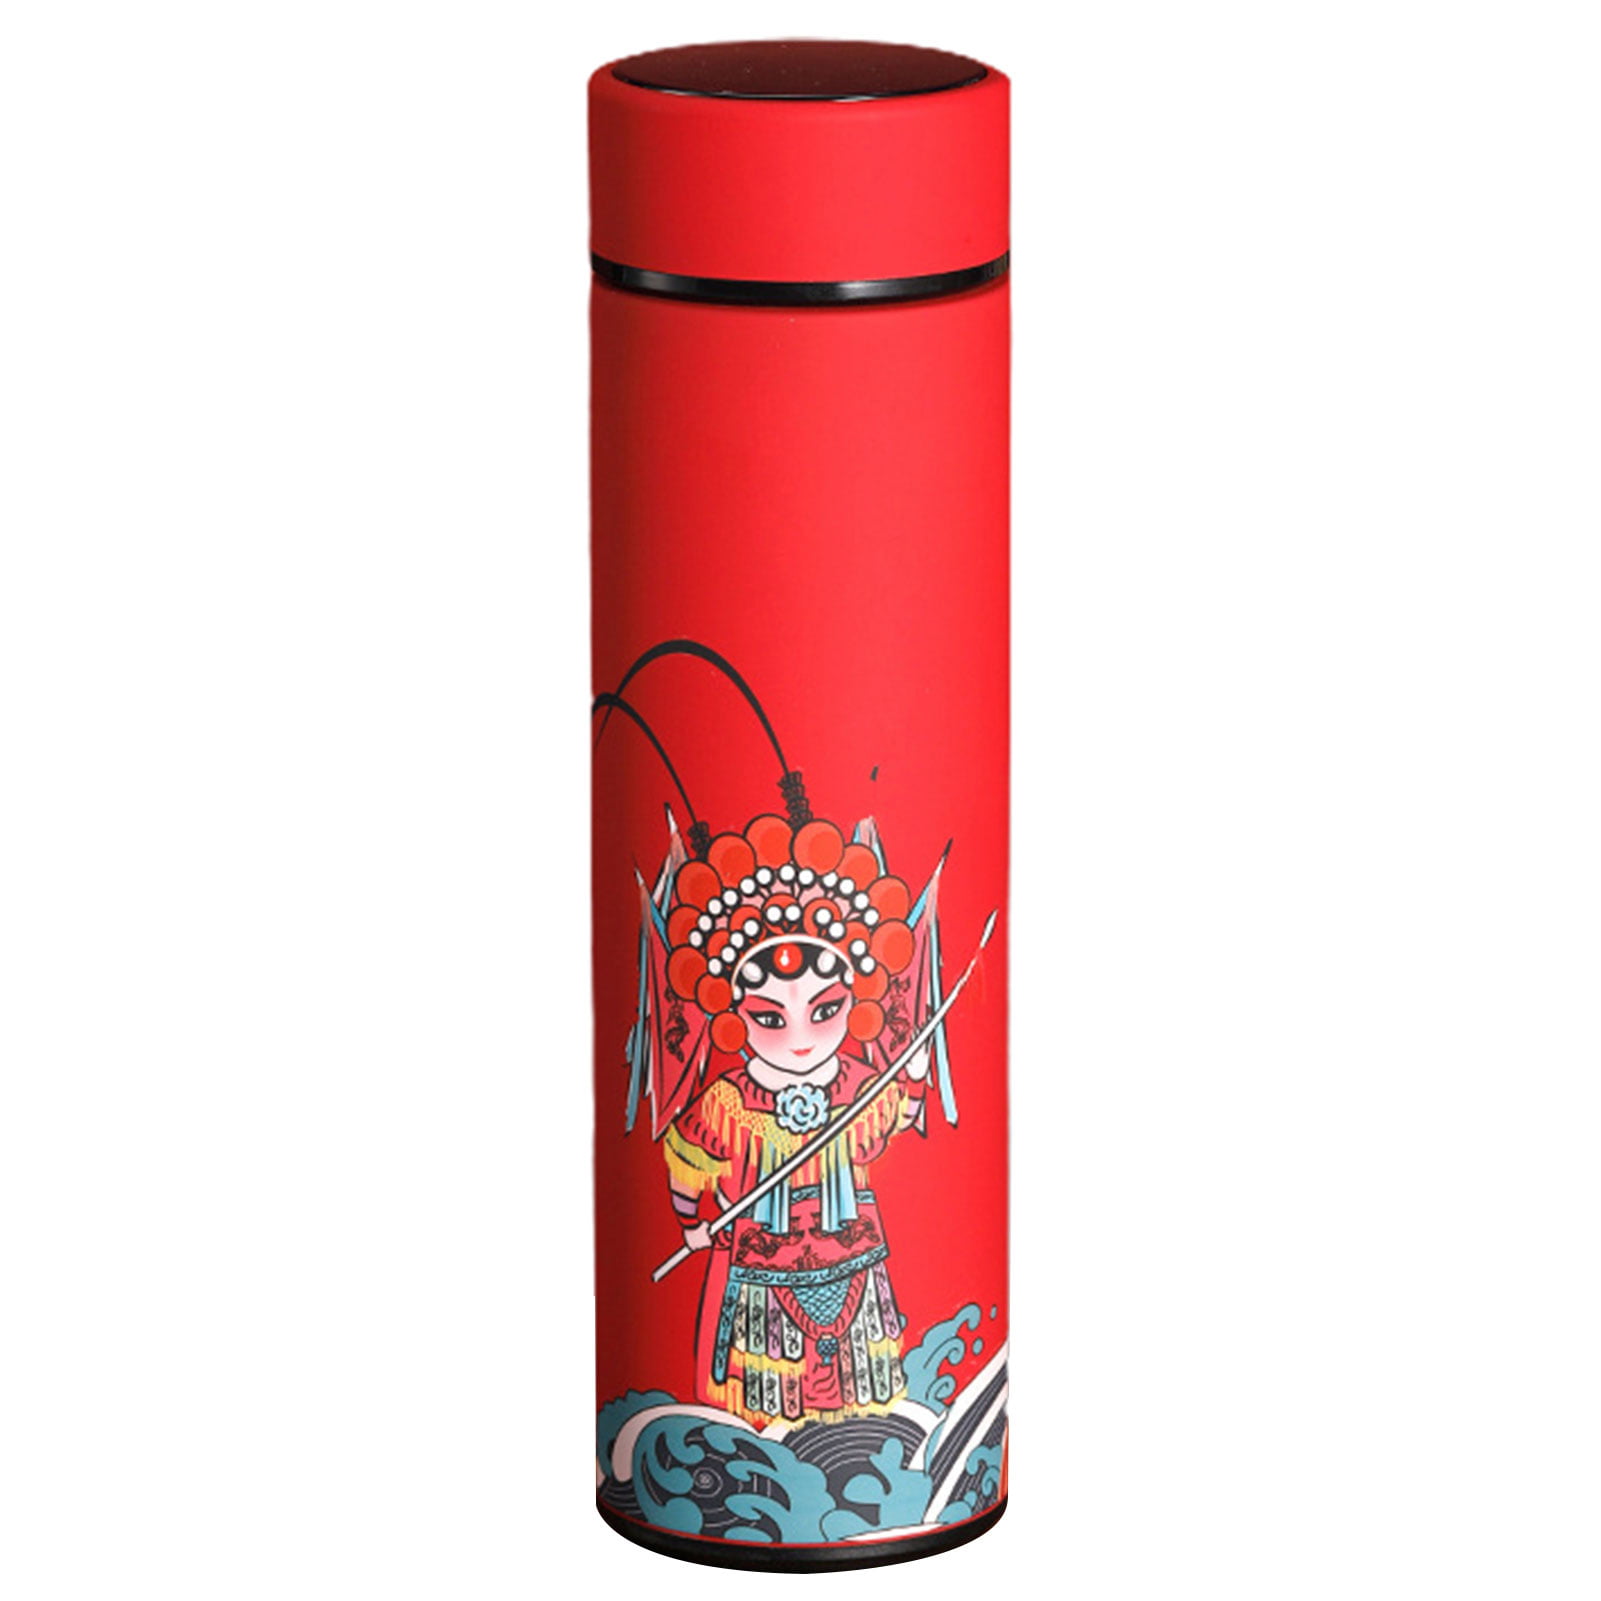 Buy Wholesale China Bullet Vacuum Flask Stainless Steel Insulated Cup  Warhead Water Bottle Thermos 500ml 350ml 1000ml & Vacuum Flask at USD 3.79